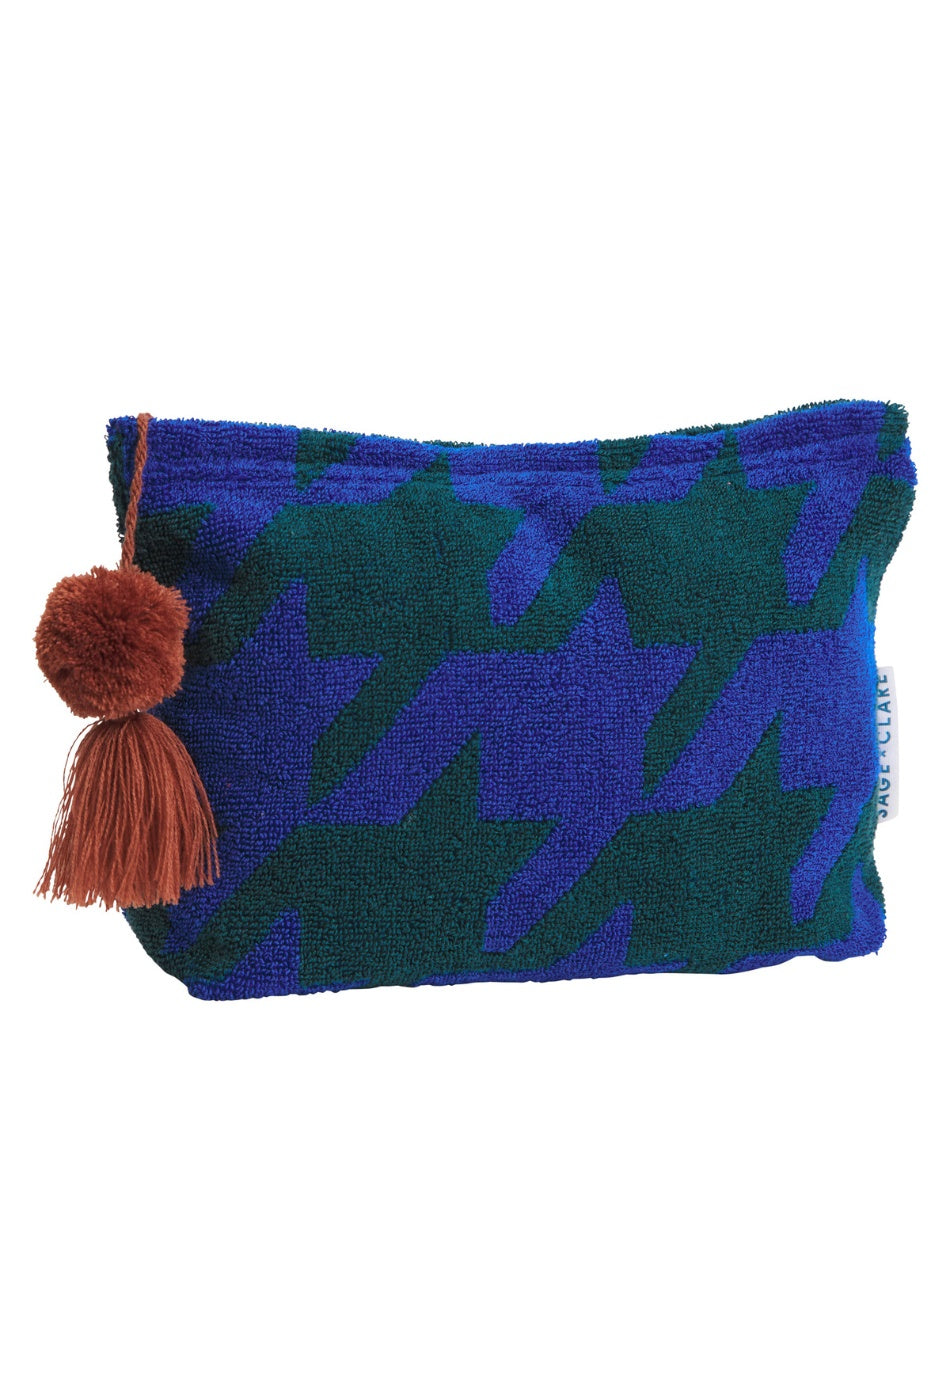 Vinita Terry Pouch - Lapis - Small-SAGE AND CLARE-P&K The General Store